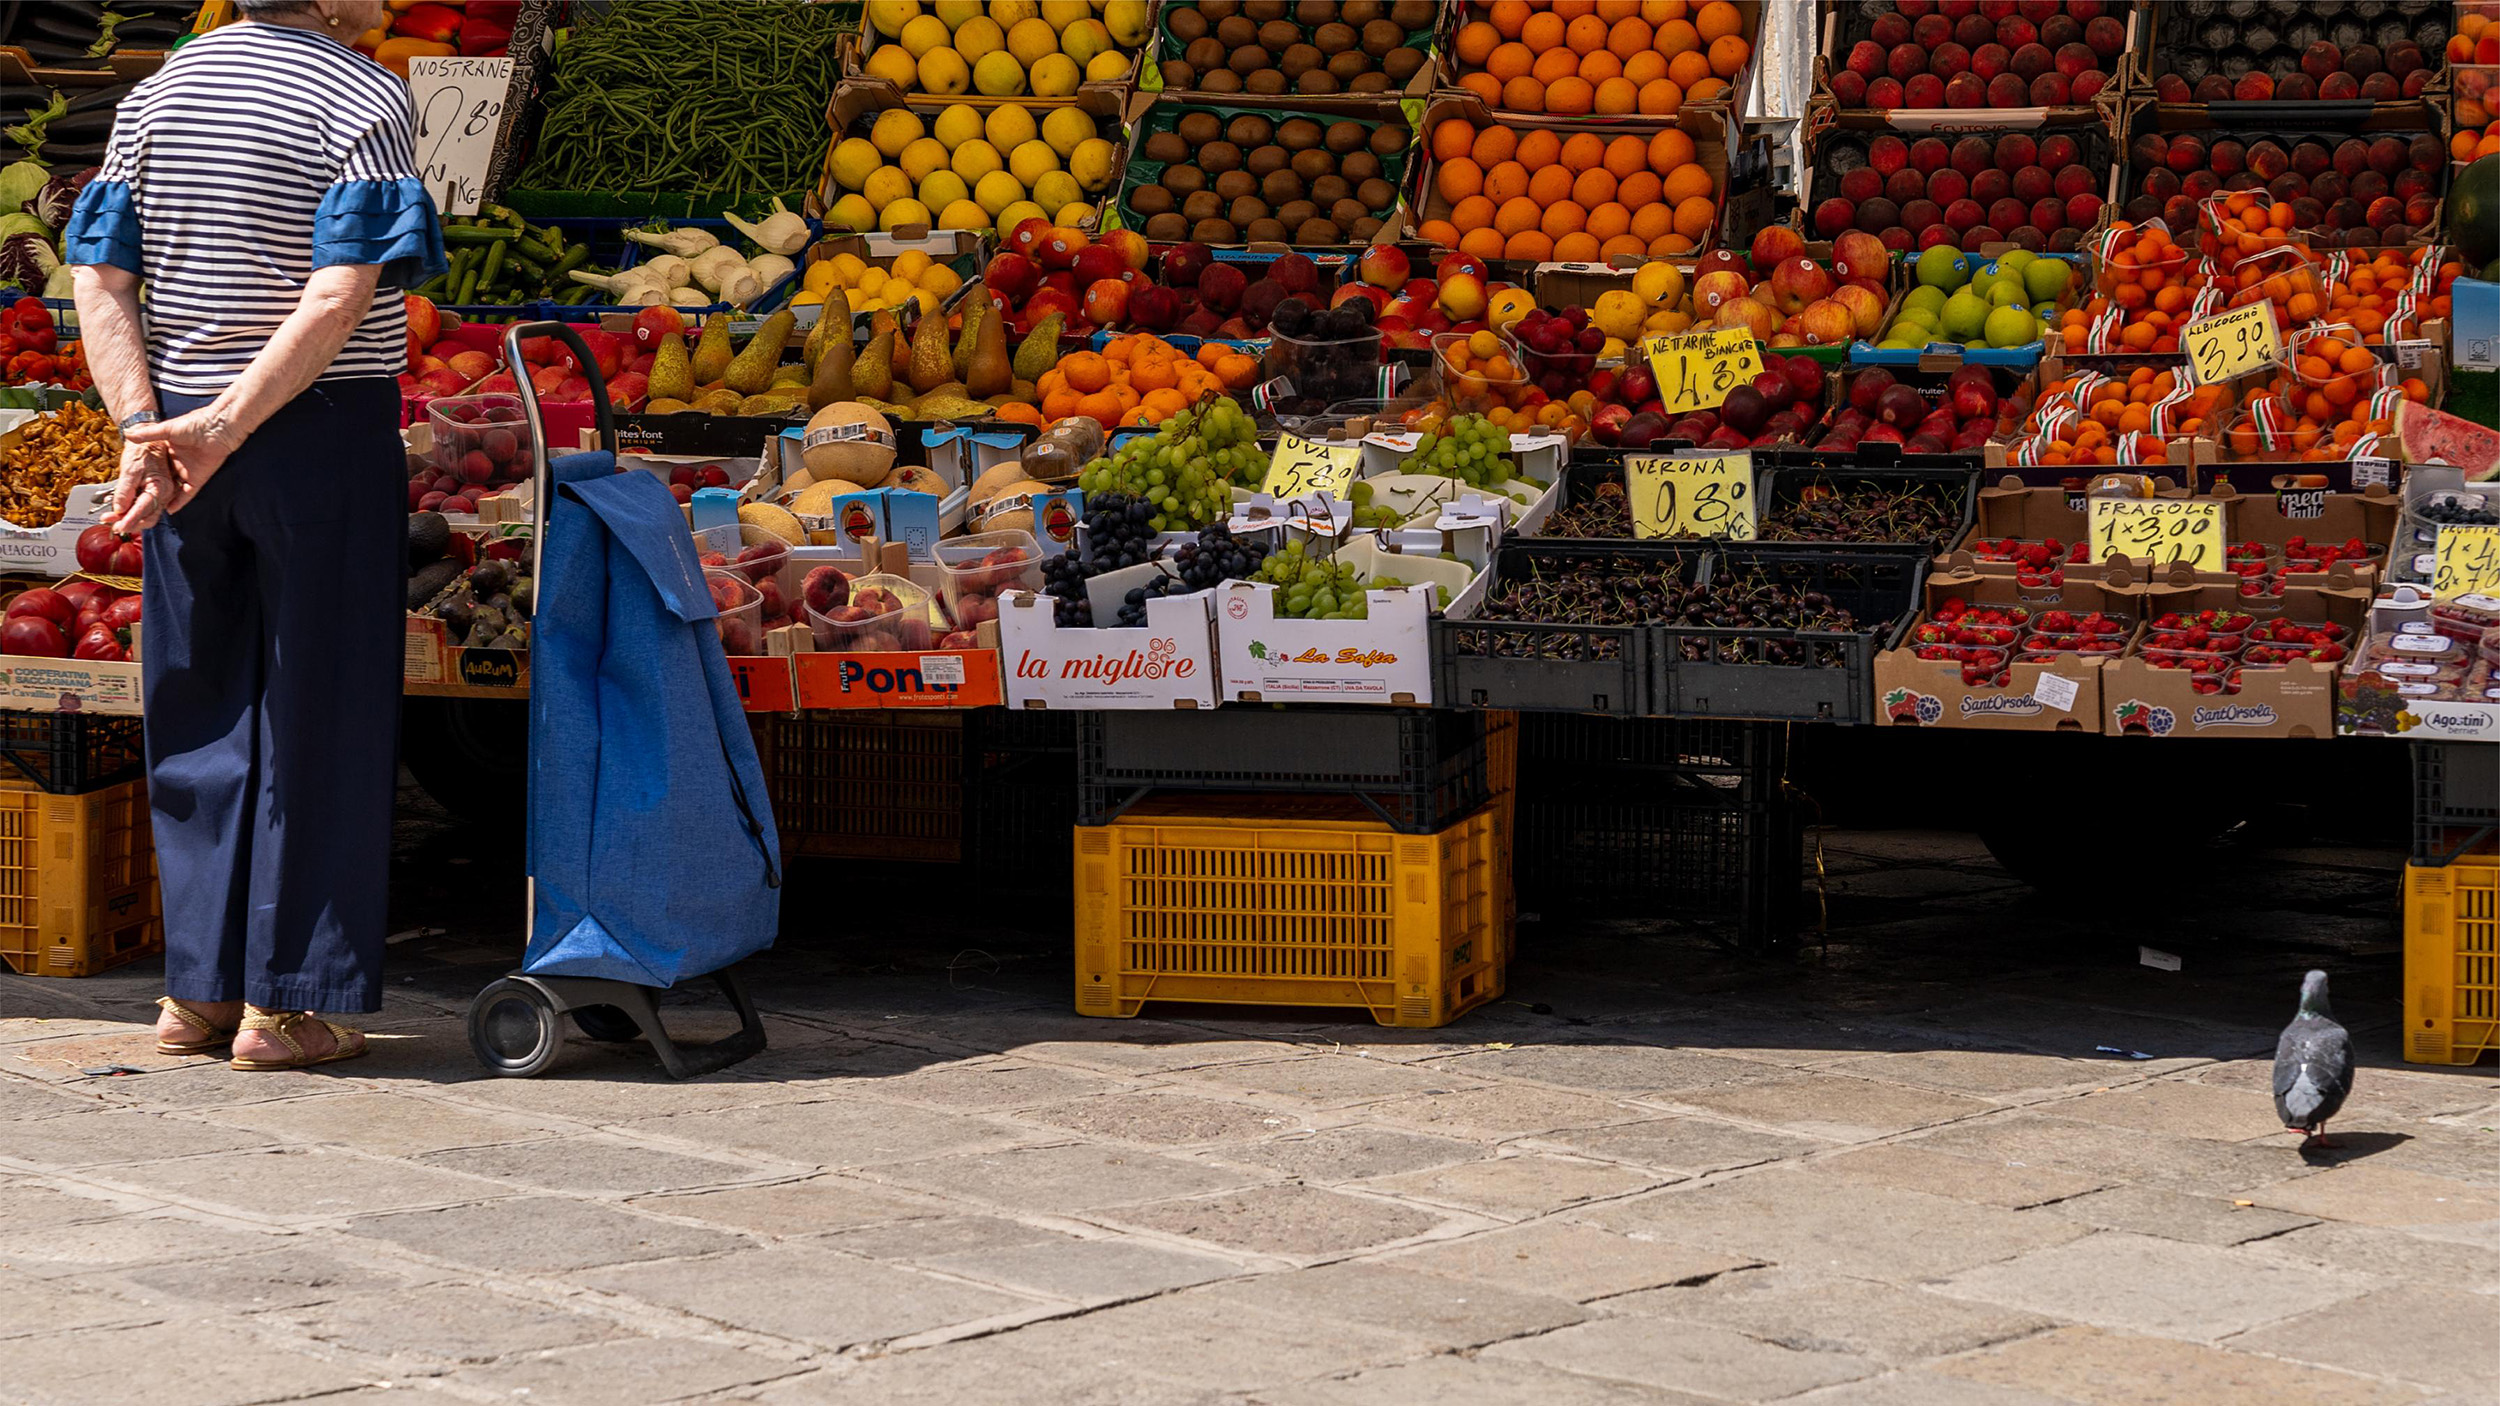 A Fruit and Vegetable Stand in the Mediterranean